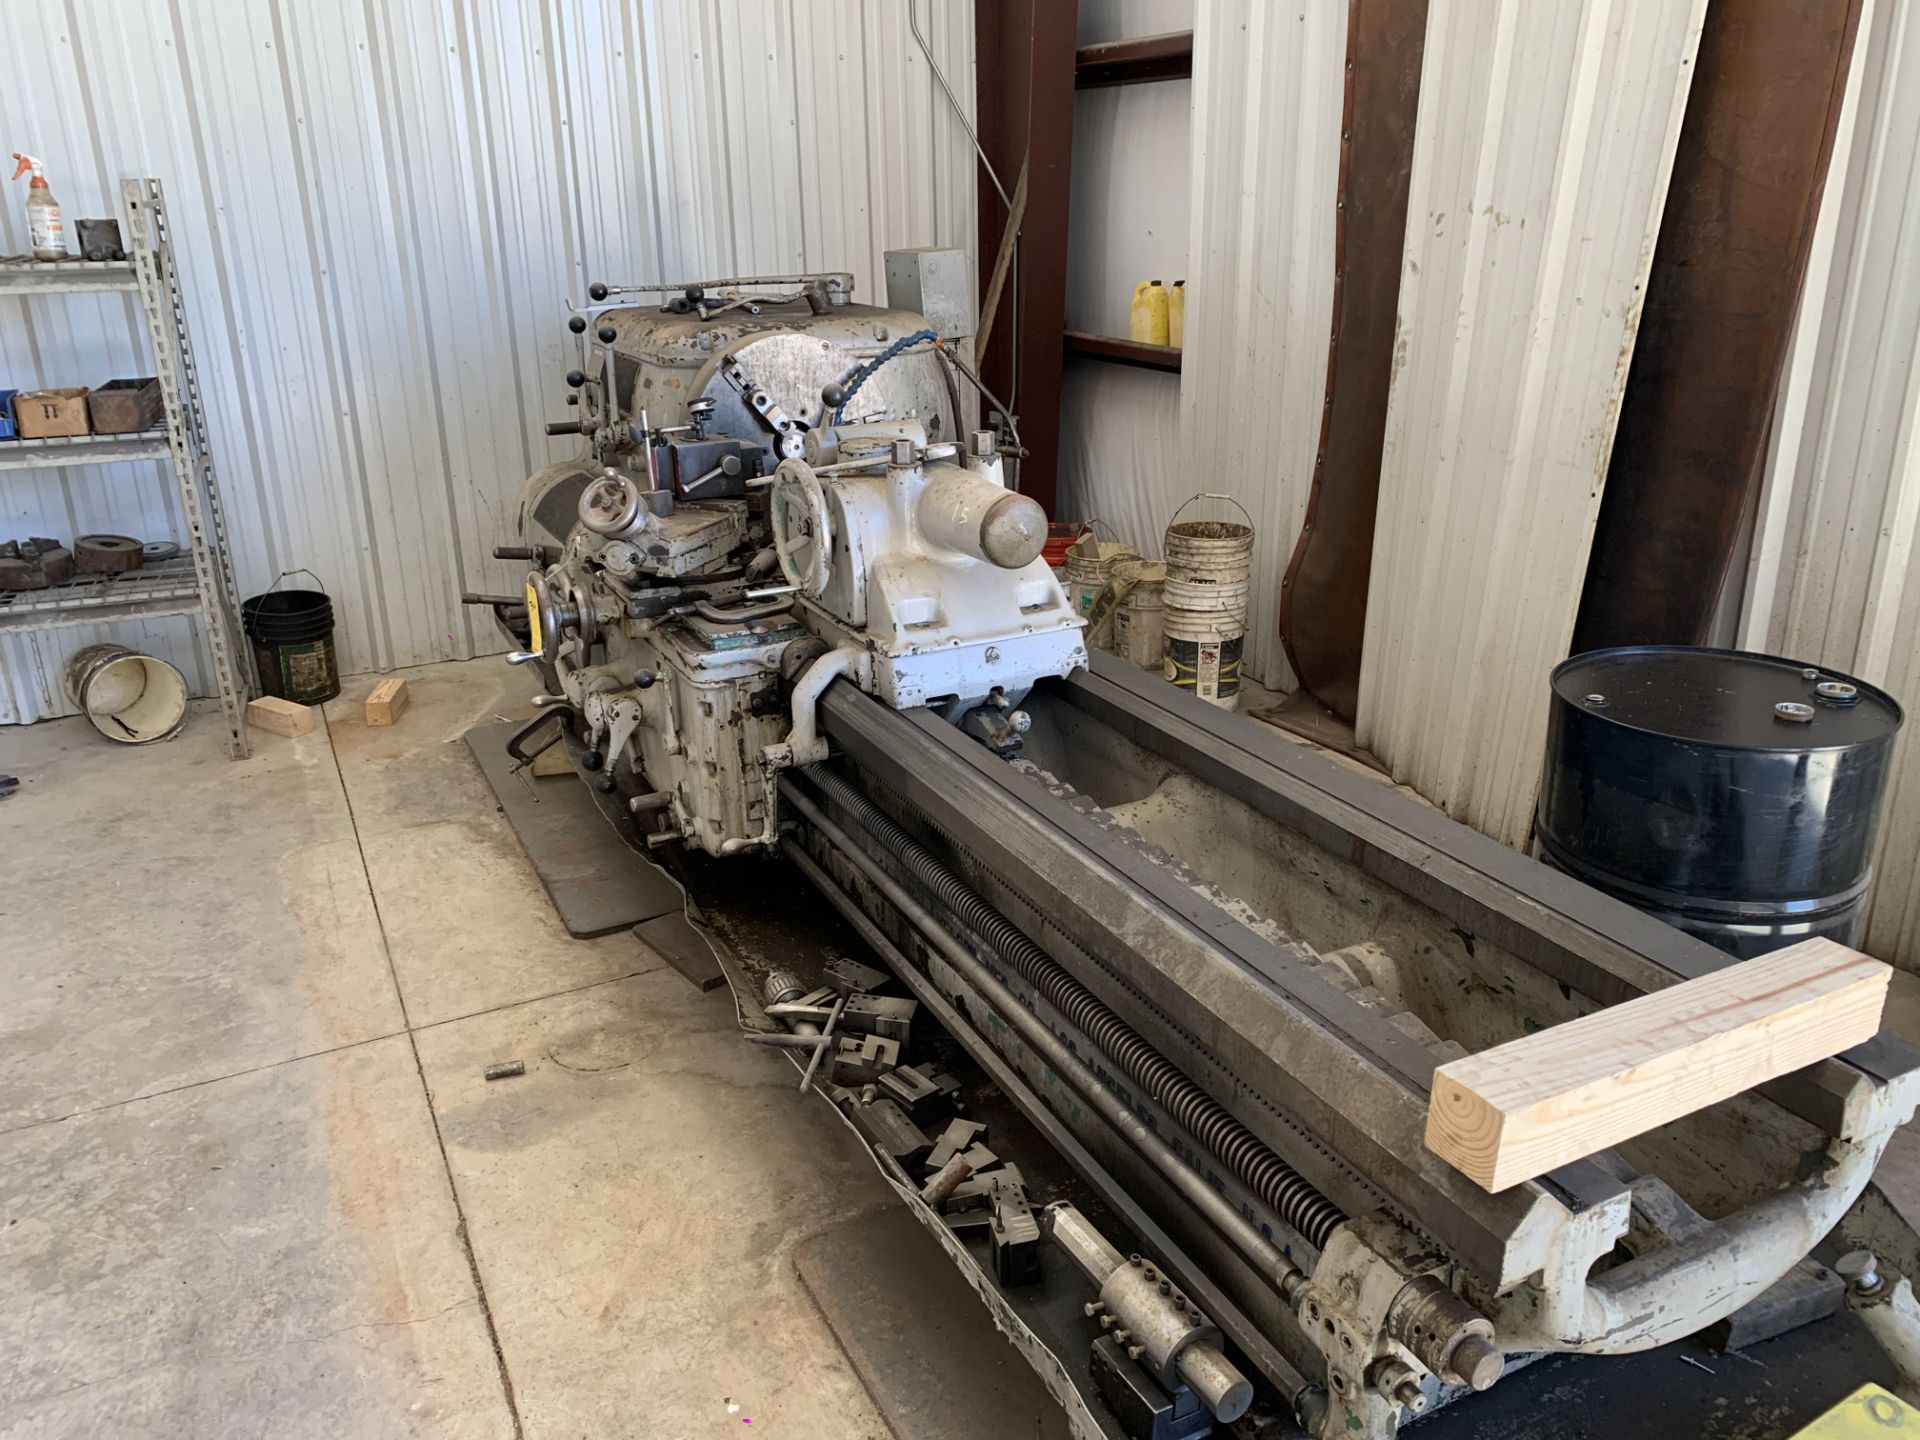 Axelson A24 Lathe, 24” x 72” Capacity (MUST BE REMOVED BY NOVEMBER 16, 2022) - Image 4 of 6